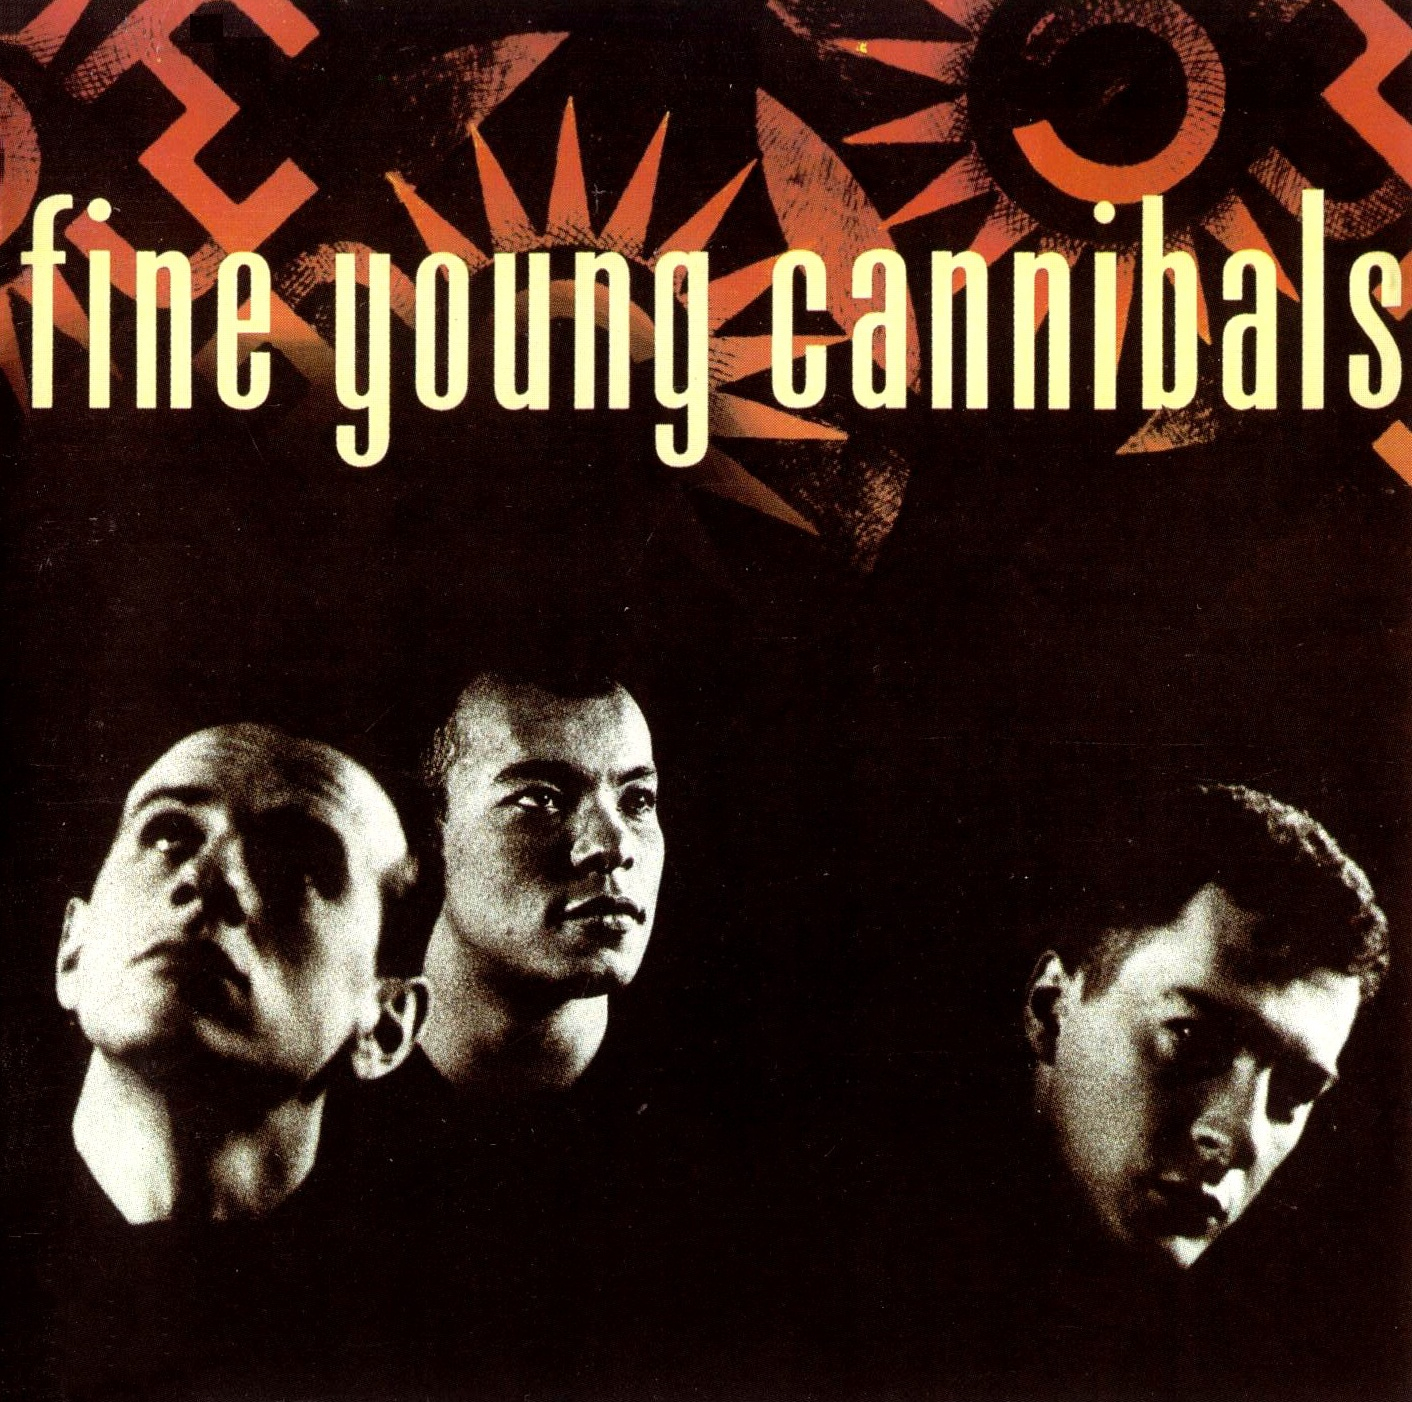 Johnny Come Home ( song lyrics ) ... Fine Young Cannibals